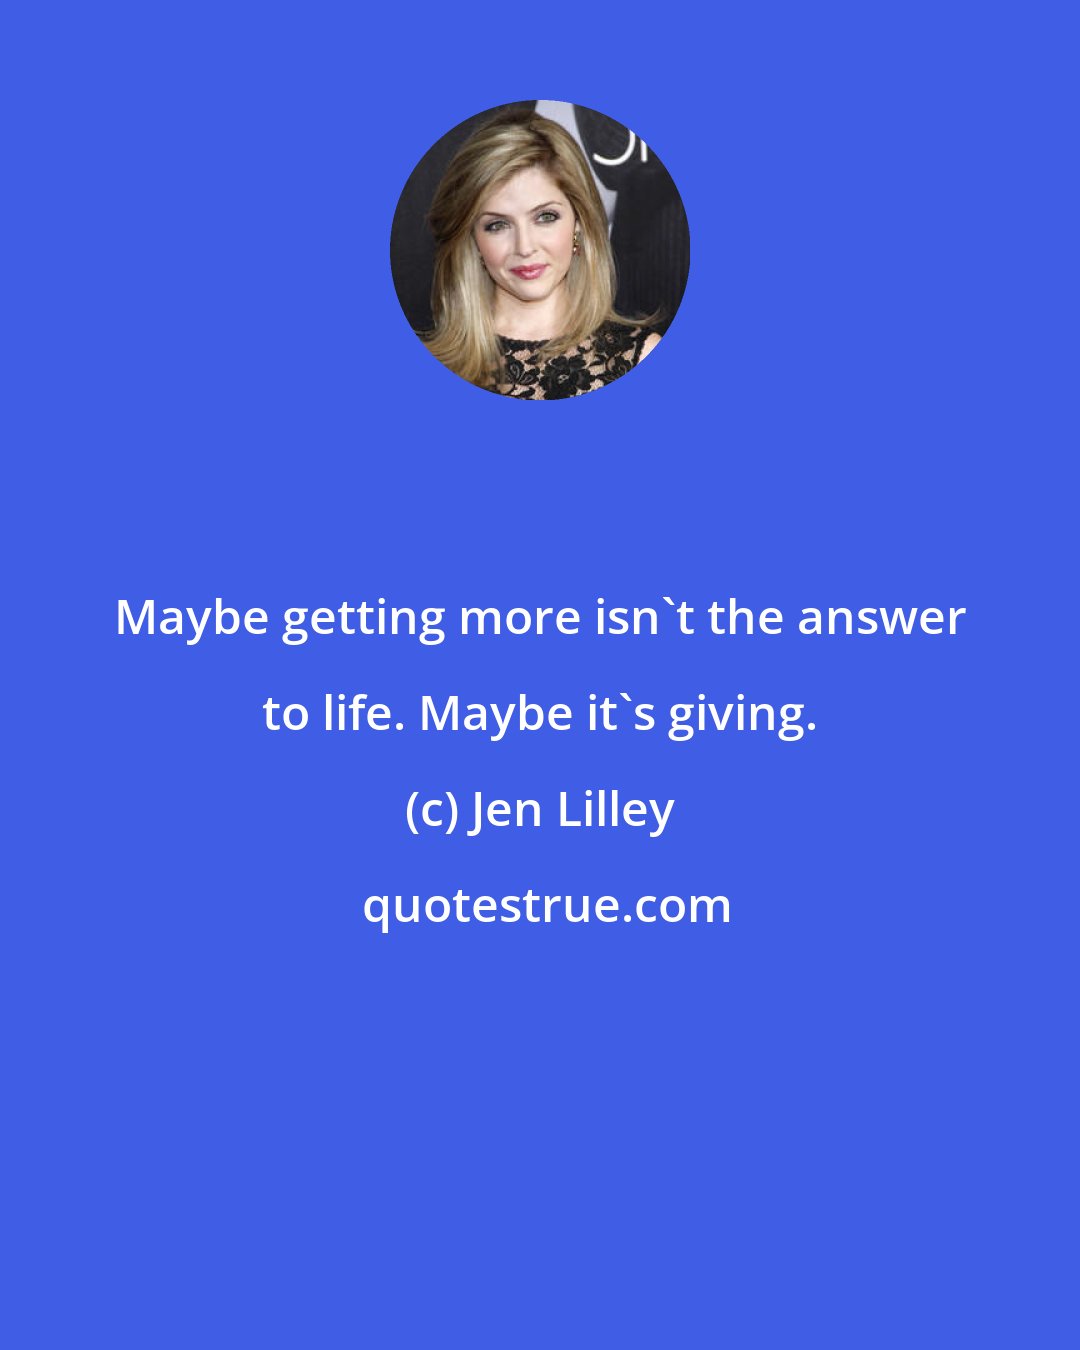 Jen Lilley: Maybe getting more isn't the answer to life. Maybe it's giving.